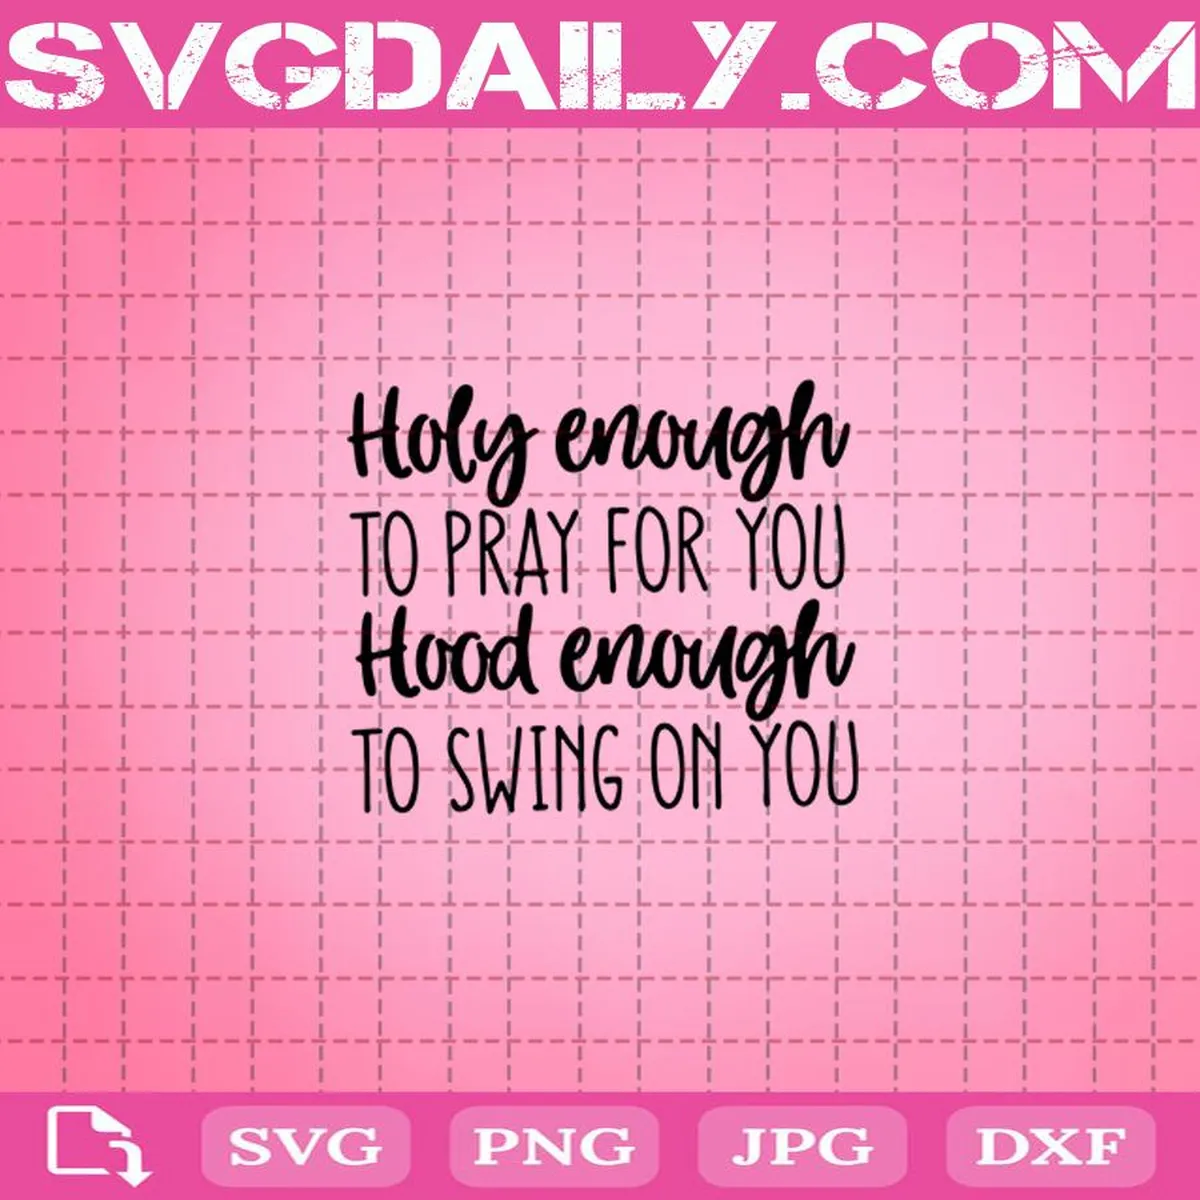 Funny Christian Svg, Holy Enough To Pray For You Svg, Hood Enough To Swing On You Svg, Svg Png Dxf Eps Download Files